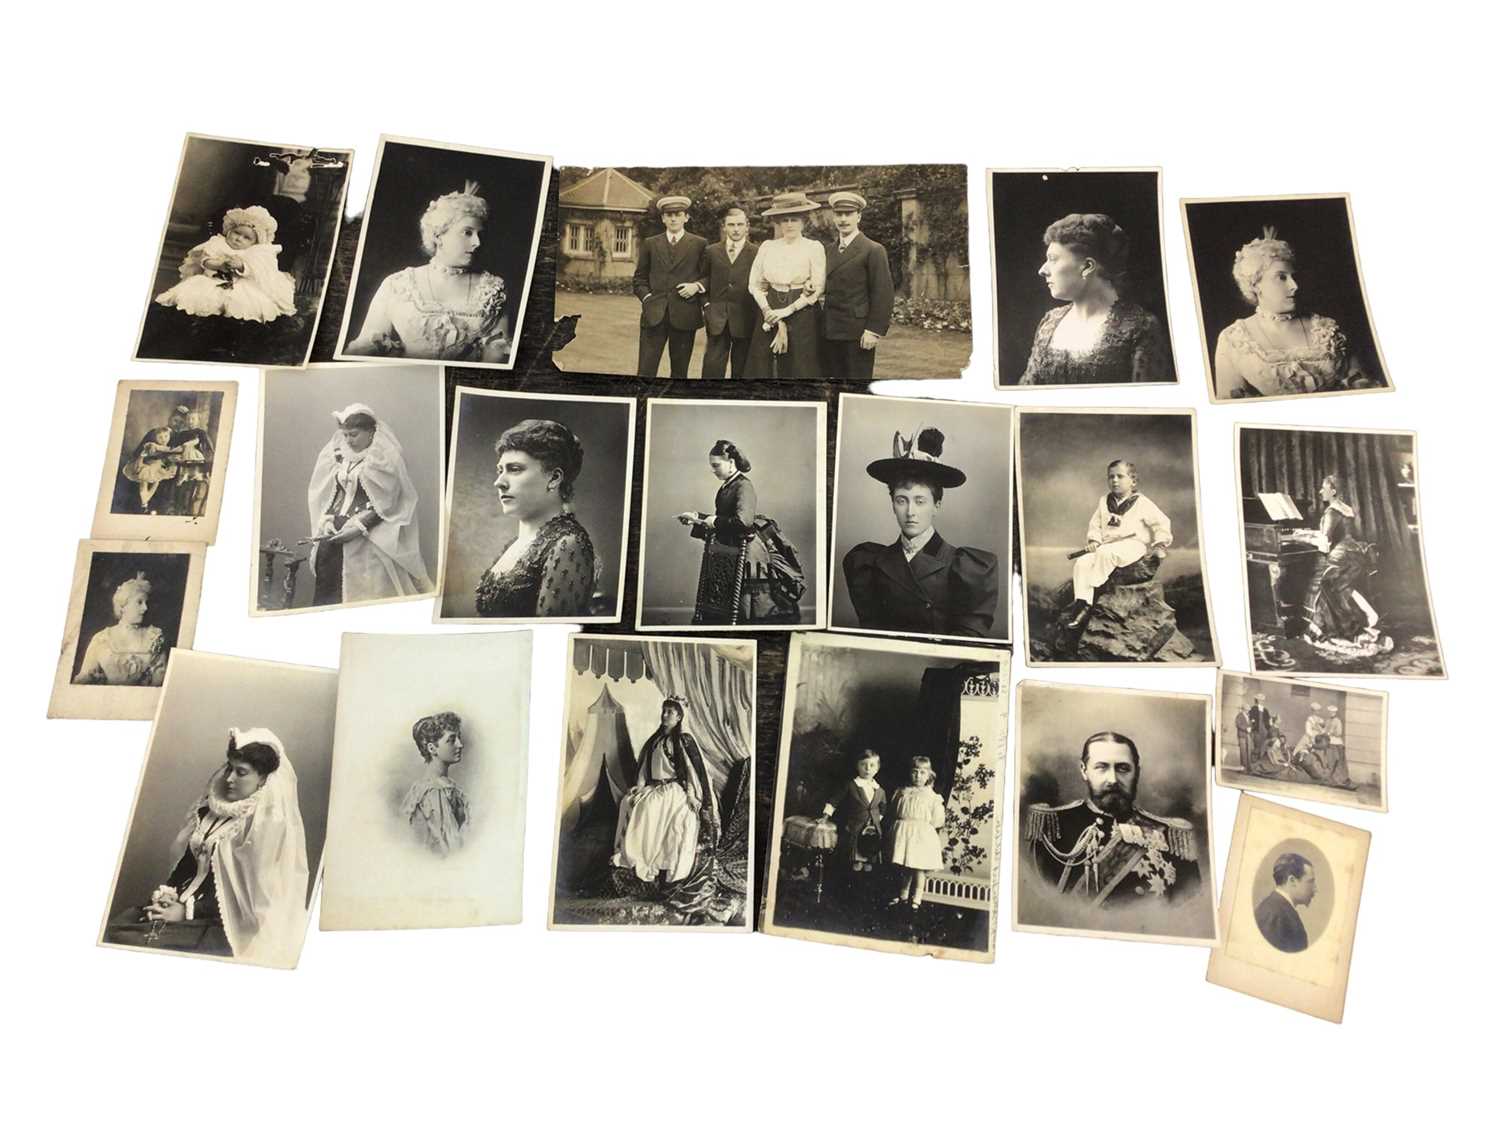 Lot 27 - The family of Queen Victoria, collection of family portrait photographs including Princess Louise Duchess of Argyll, The Duke and Duchess of Albany, Princess Victoria of Schleswig- Holstein, Prince...